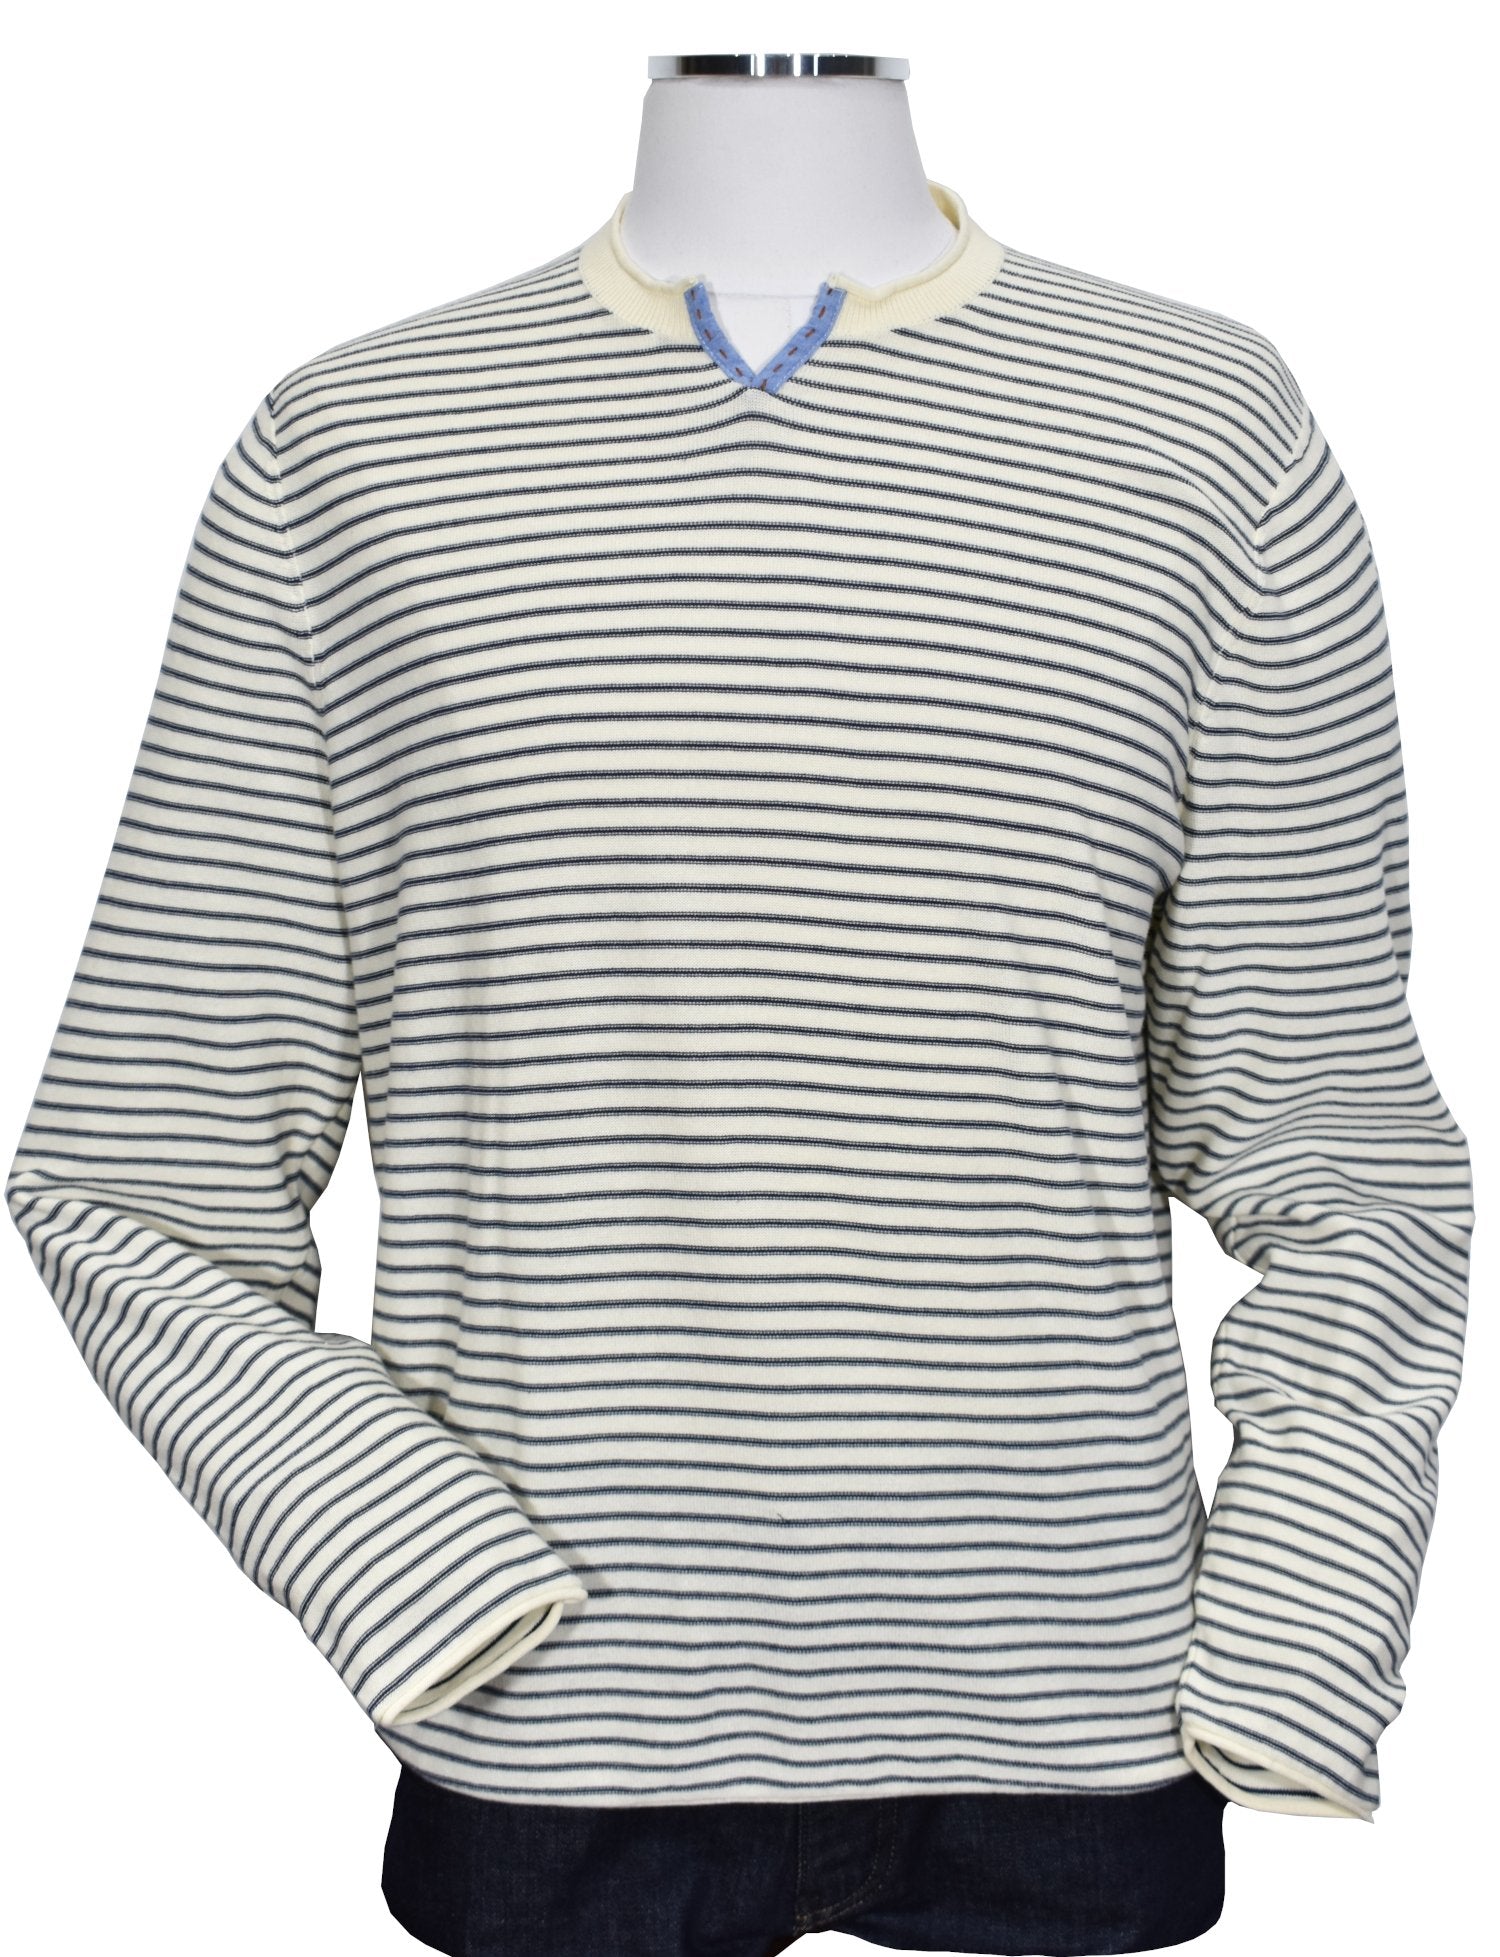 Made from 100% cotton, ZB412 Lauren Cotton Crew is the perfect go-to for any occasion. Its classic ecru knit and navy feed stripe design ensure timeless style, while its open sleeves and bottom, along with a modified v neck detail, ensures a comfortable and classic fit. Look great while keeping comfortable! by Marcello